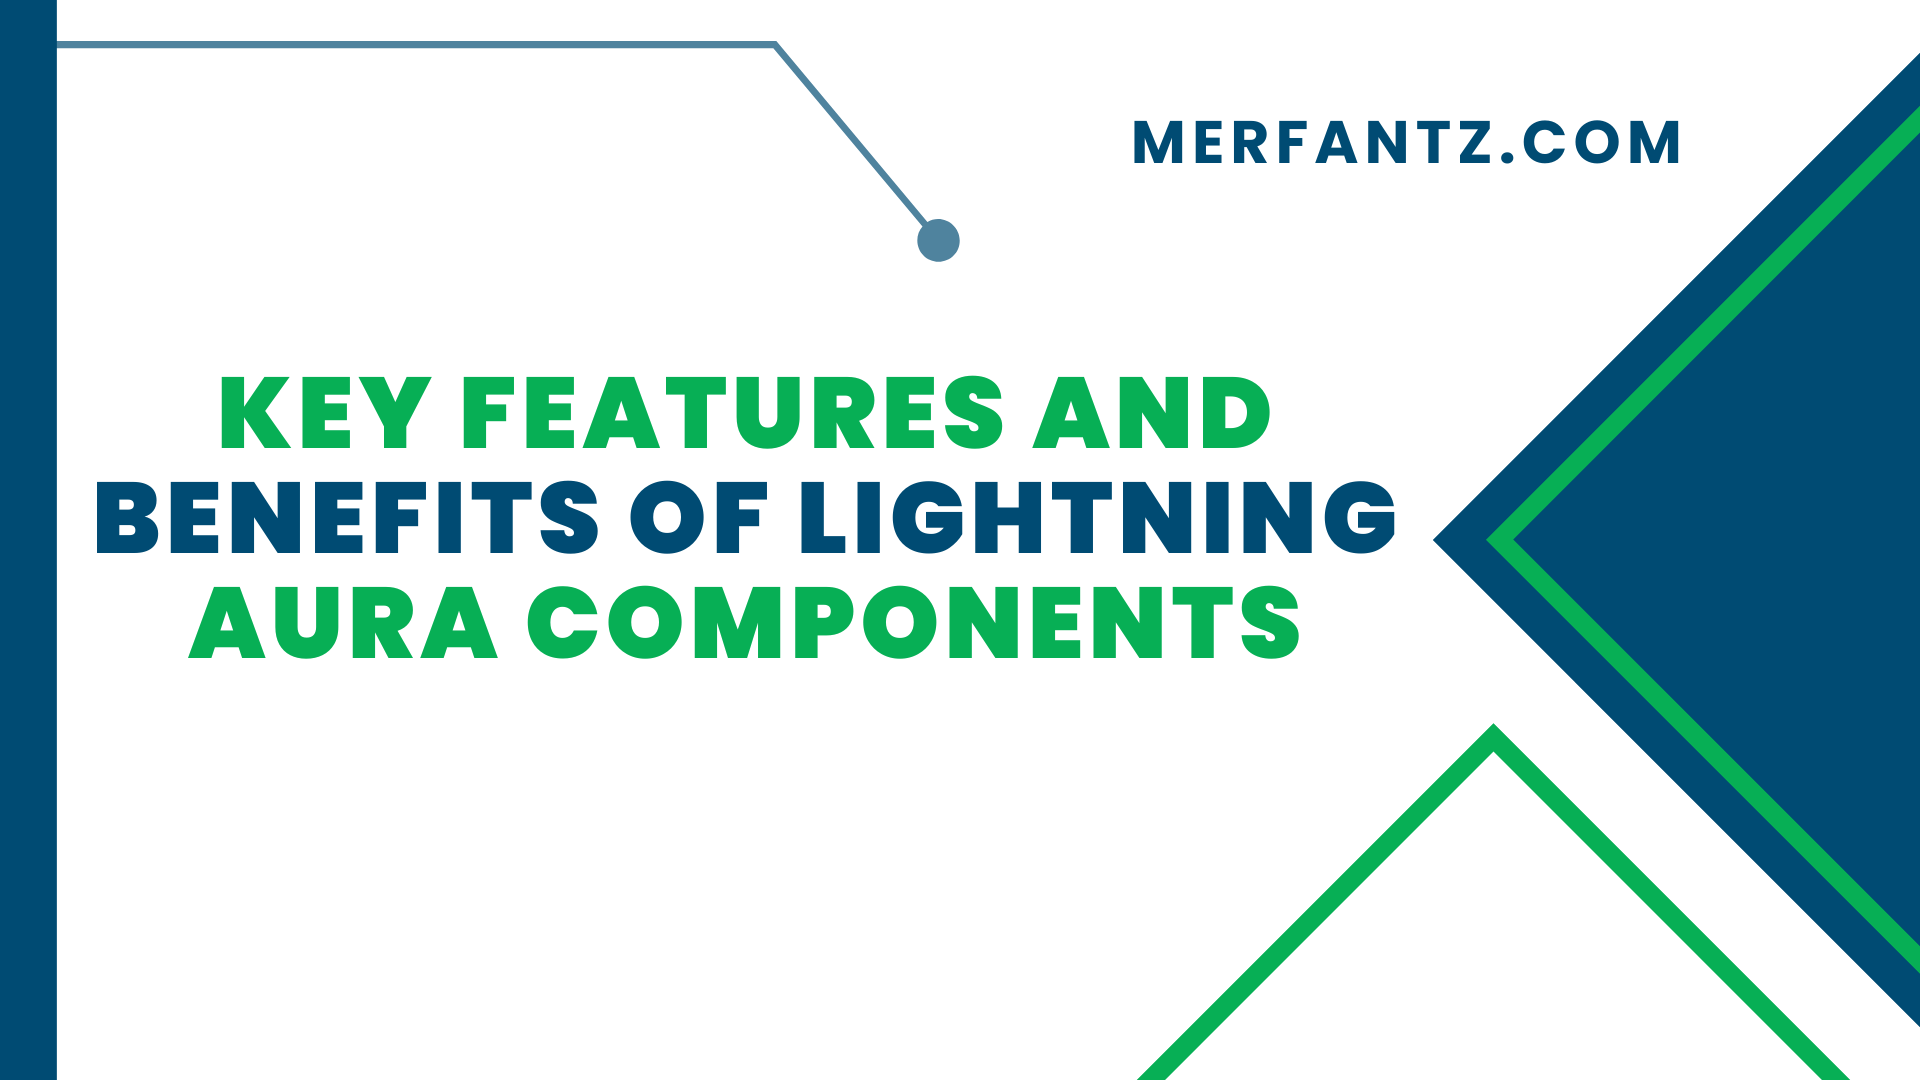 Key Features and Benefits of Lightning Aura Components